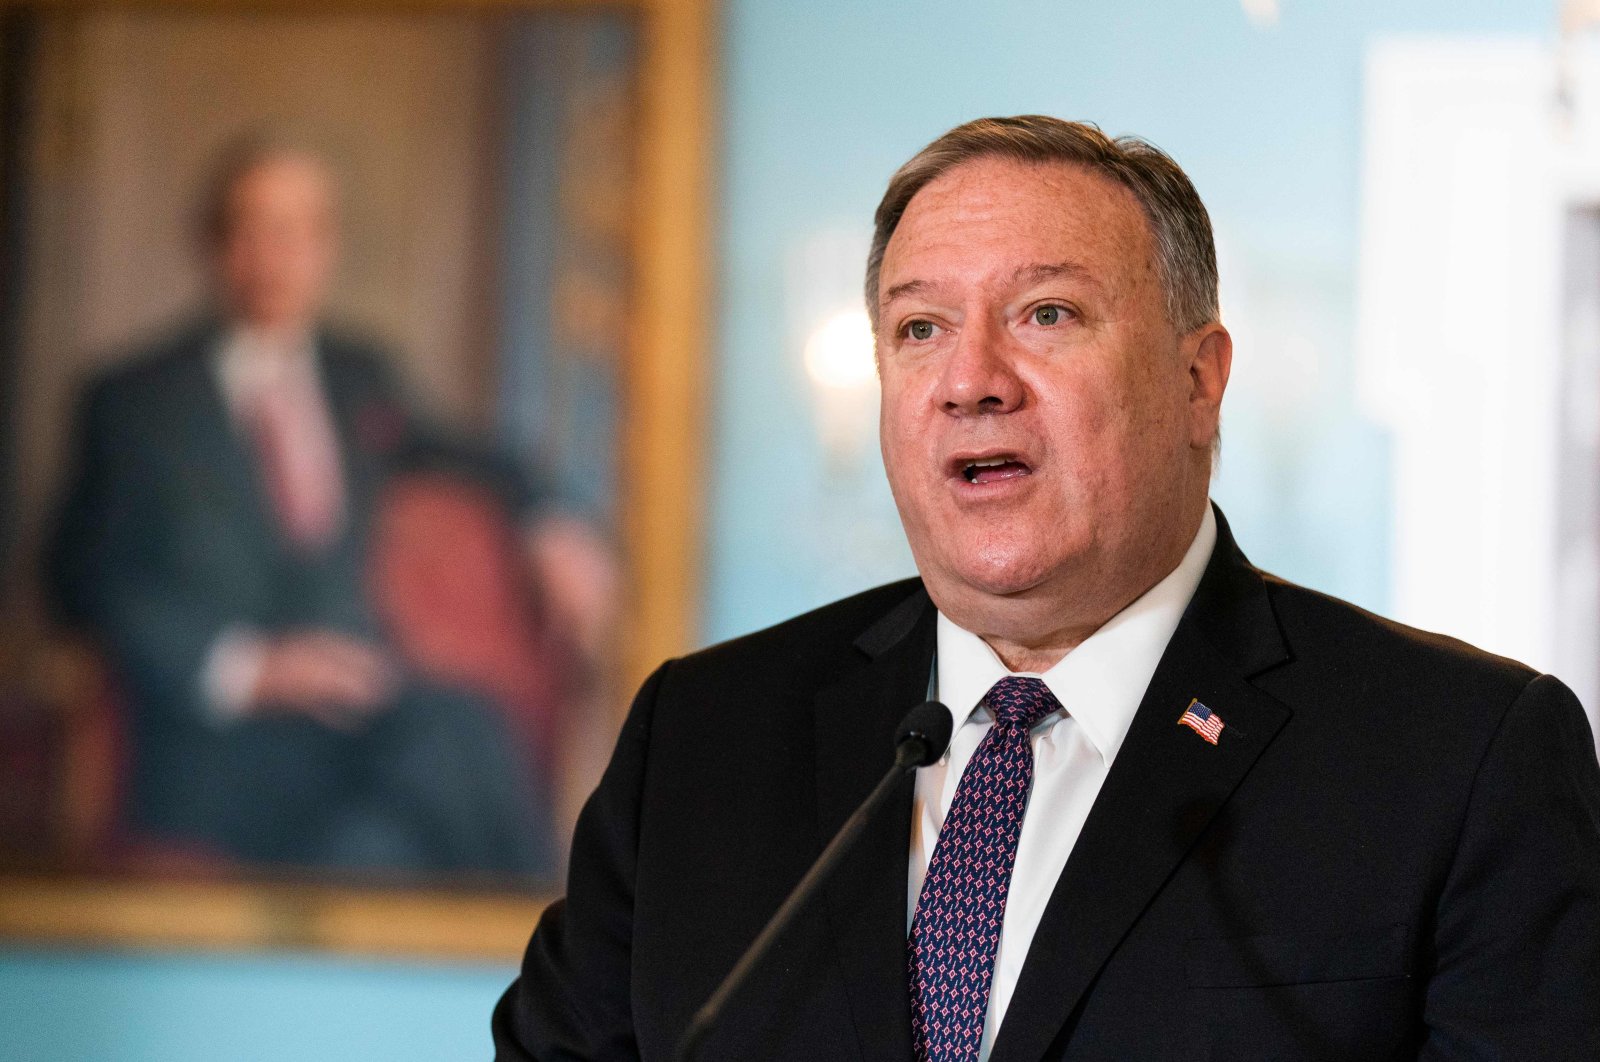 U.S. Secretary of State Mike Pompeo speaks during his meeting with Saudi Minister of Foreign Affairs Prince Faisal bin Farhan Al Saud at the State Department, Oct. 14, 2020, in Washington, DC. (AFP Photo)